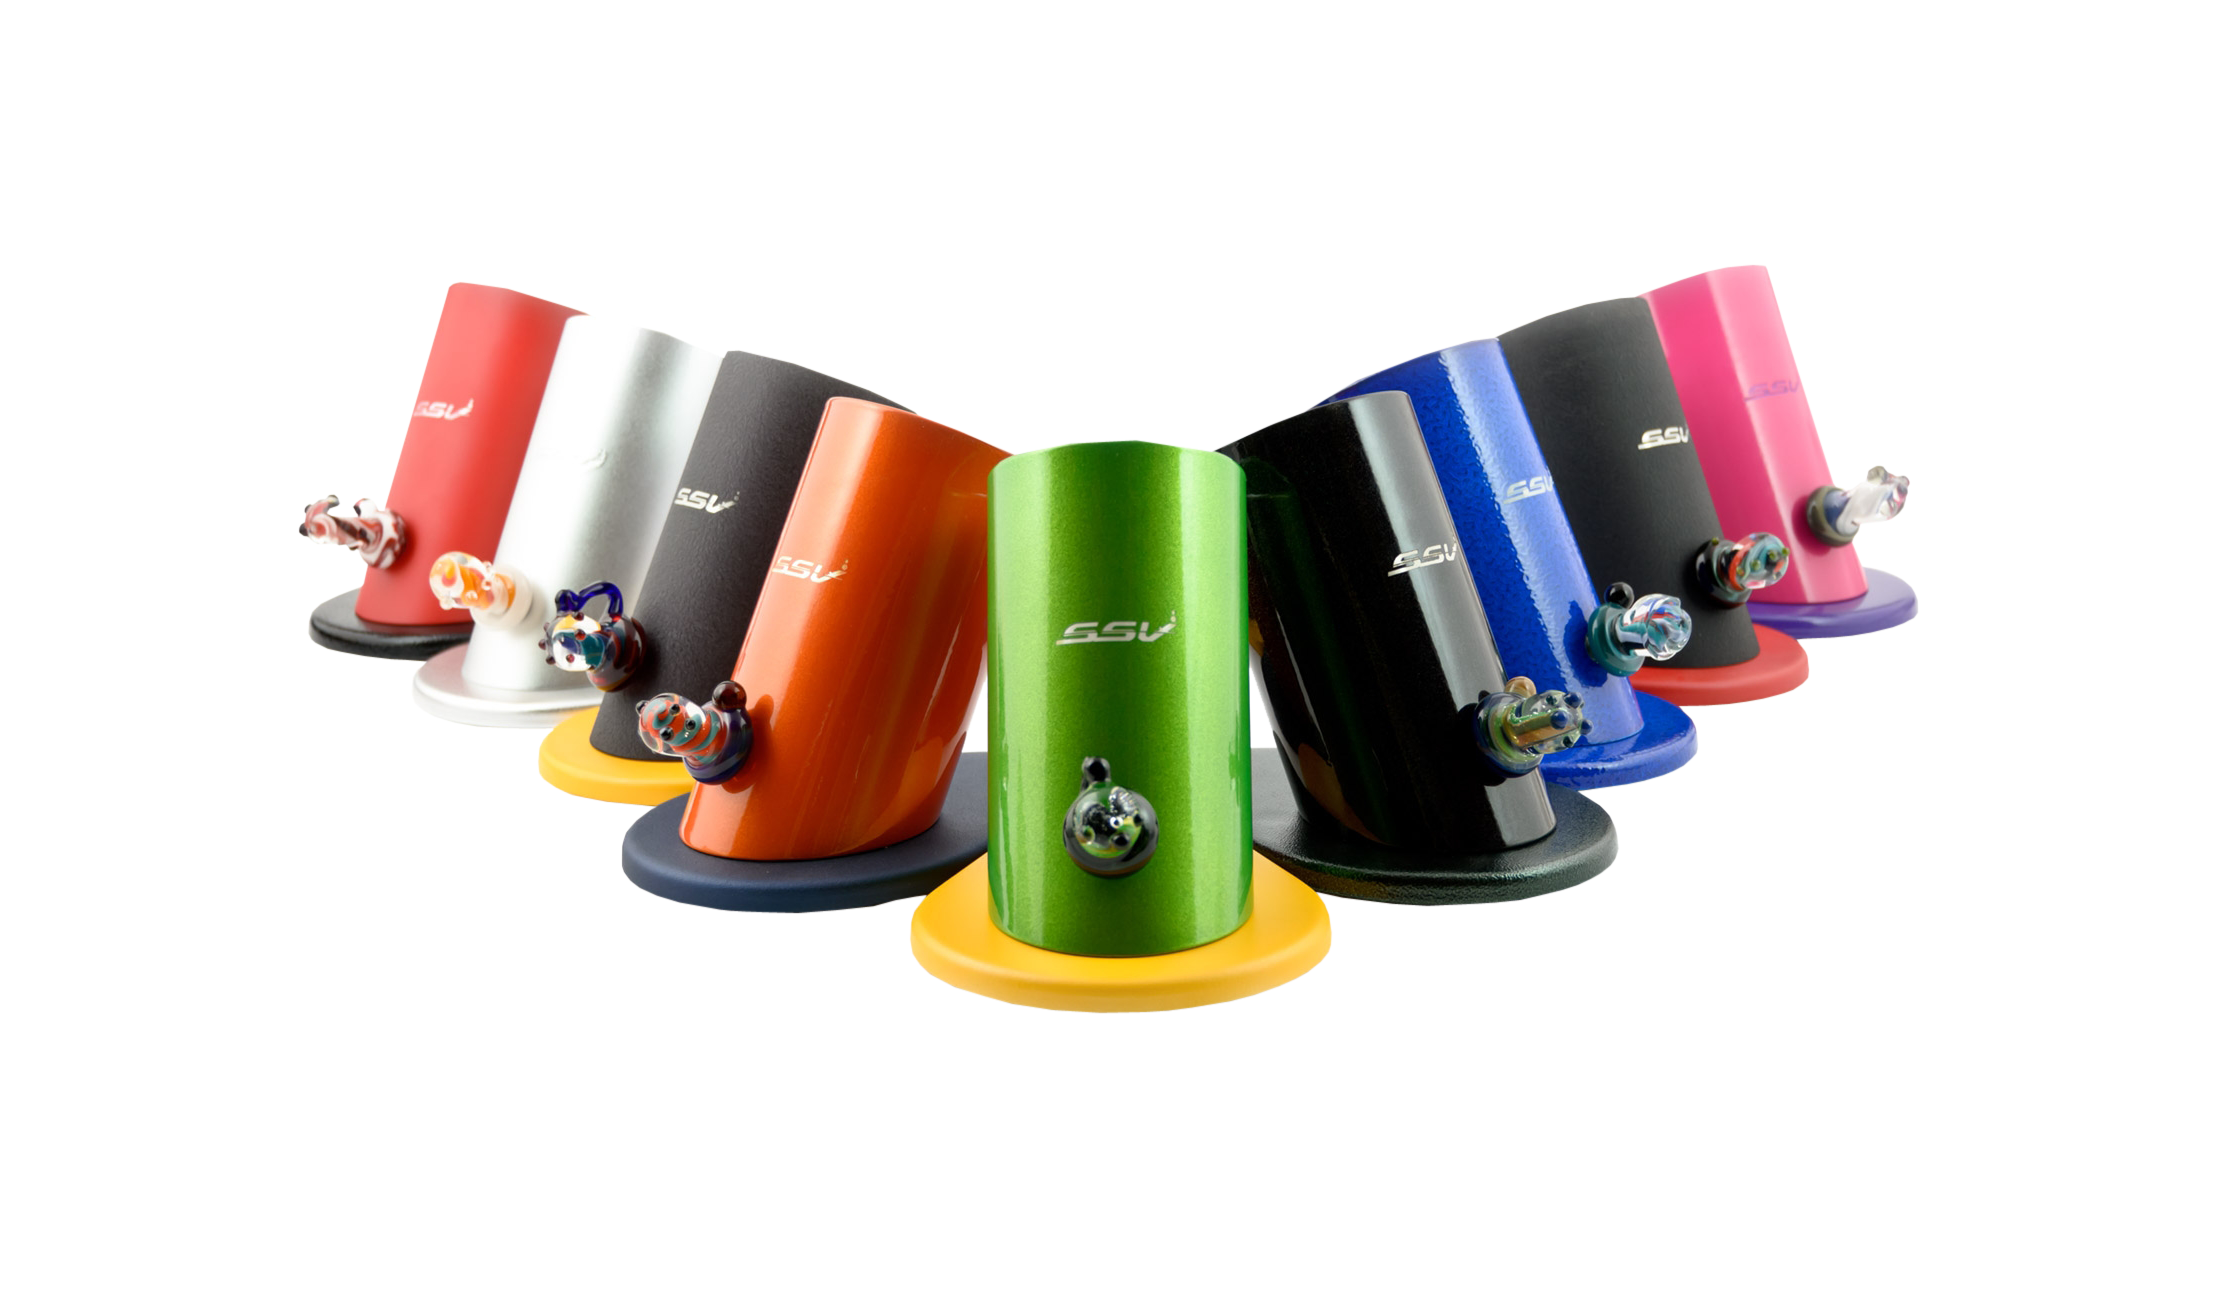 Silver Surfer Vaporizer - Green/Purple / $ 269.99 at 420 Science